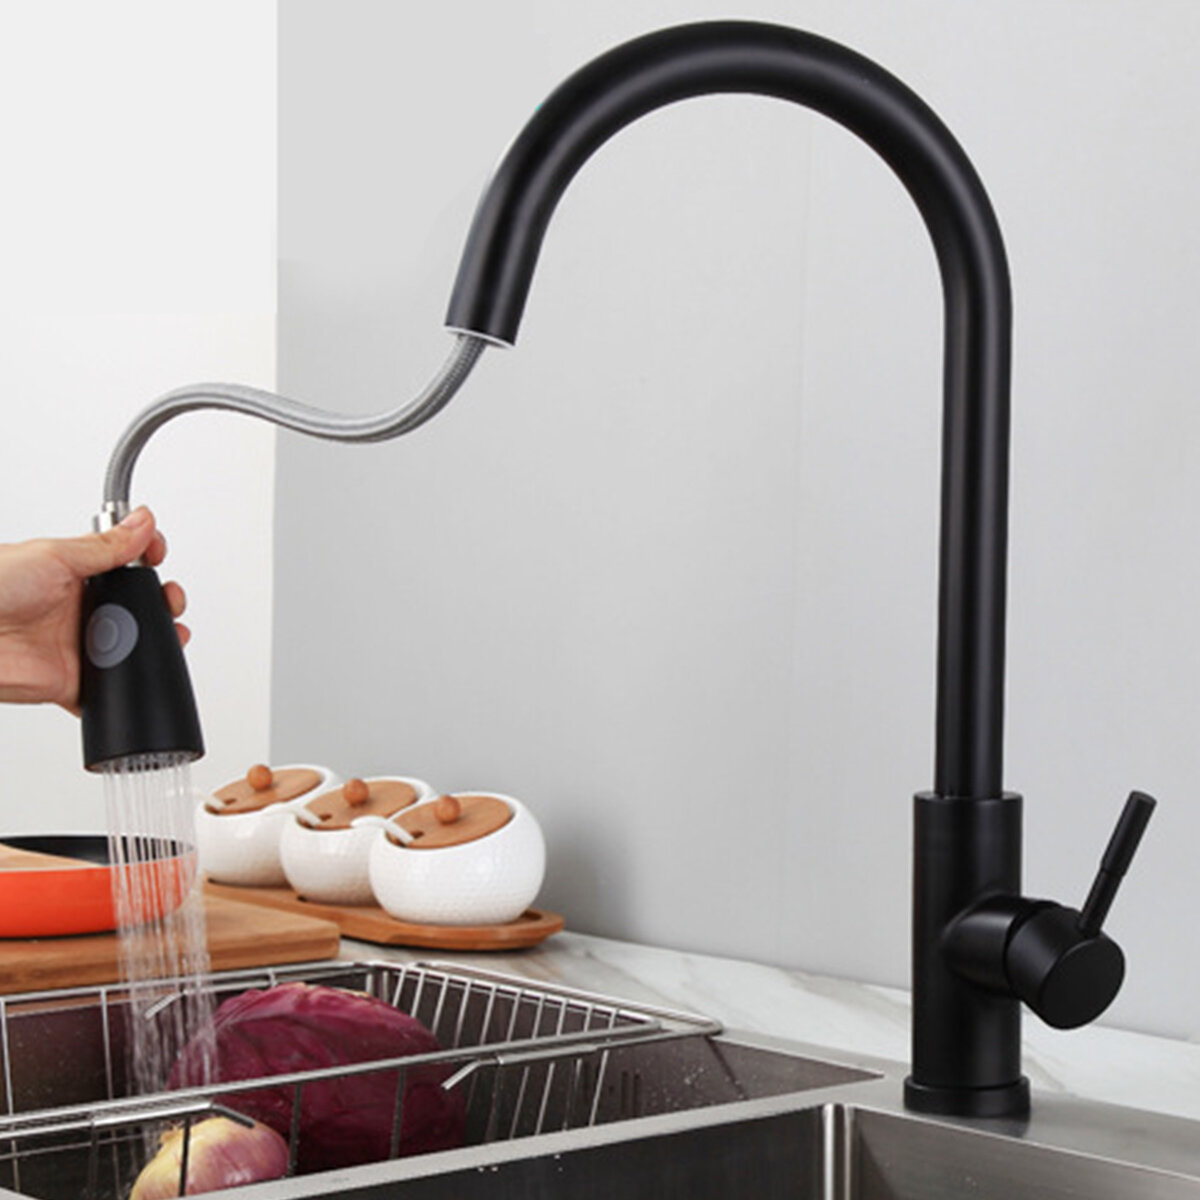 Water tap for kitchen sink